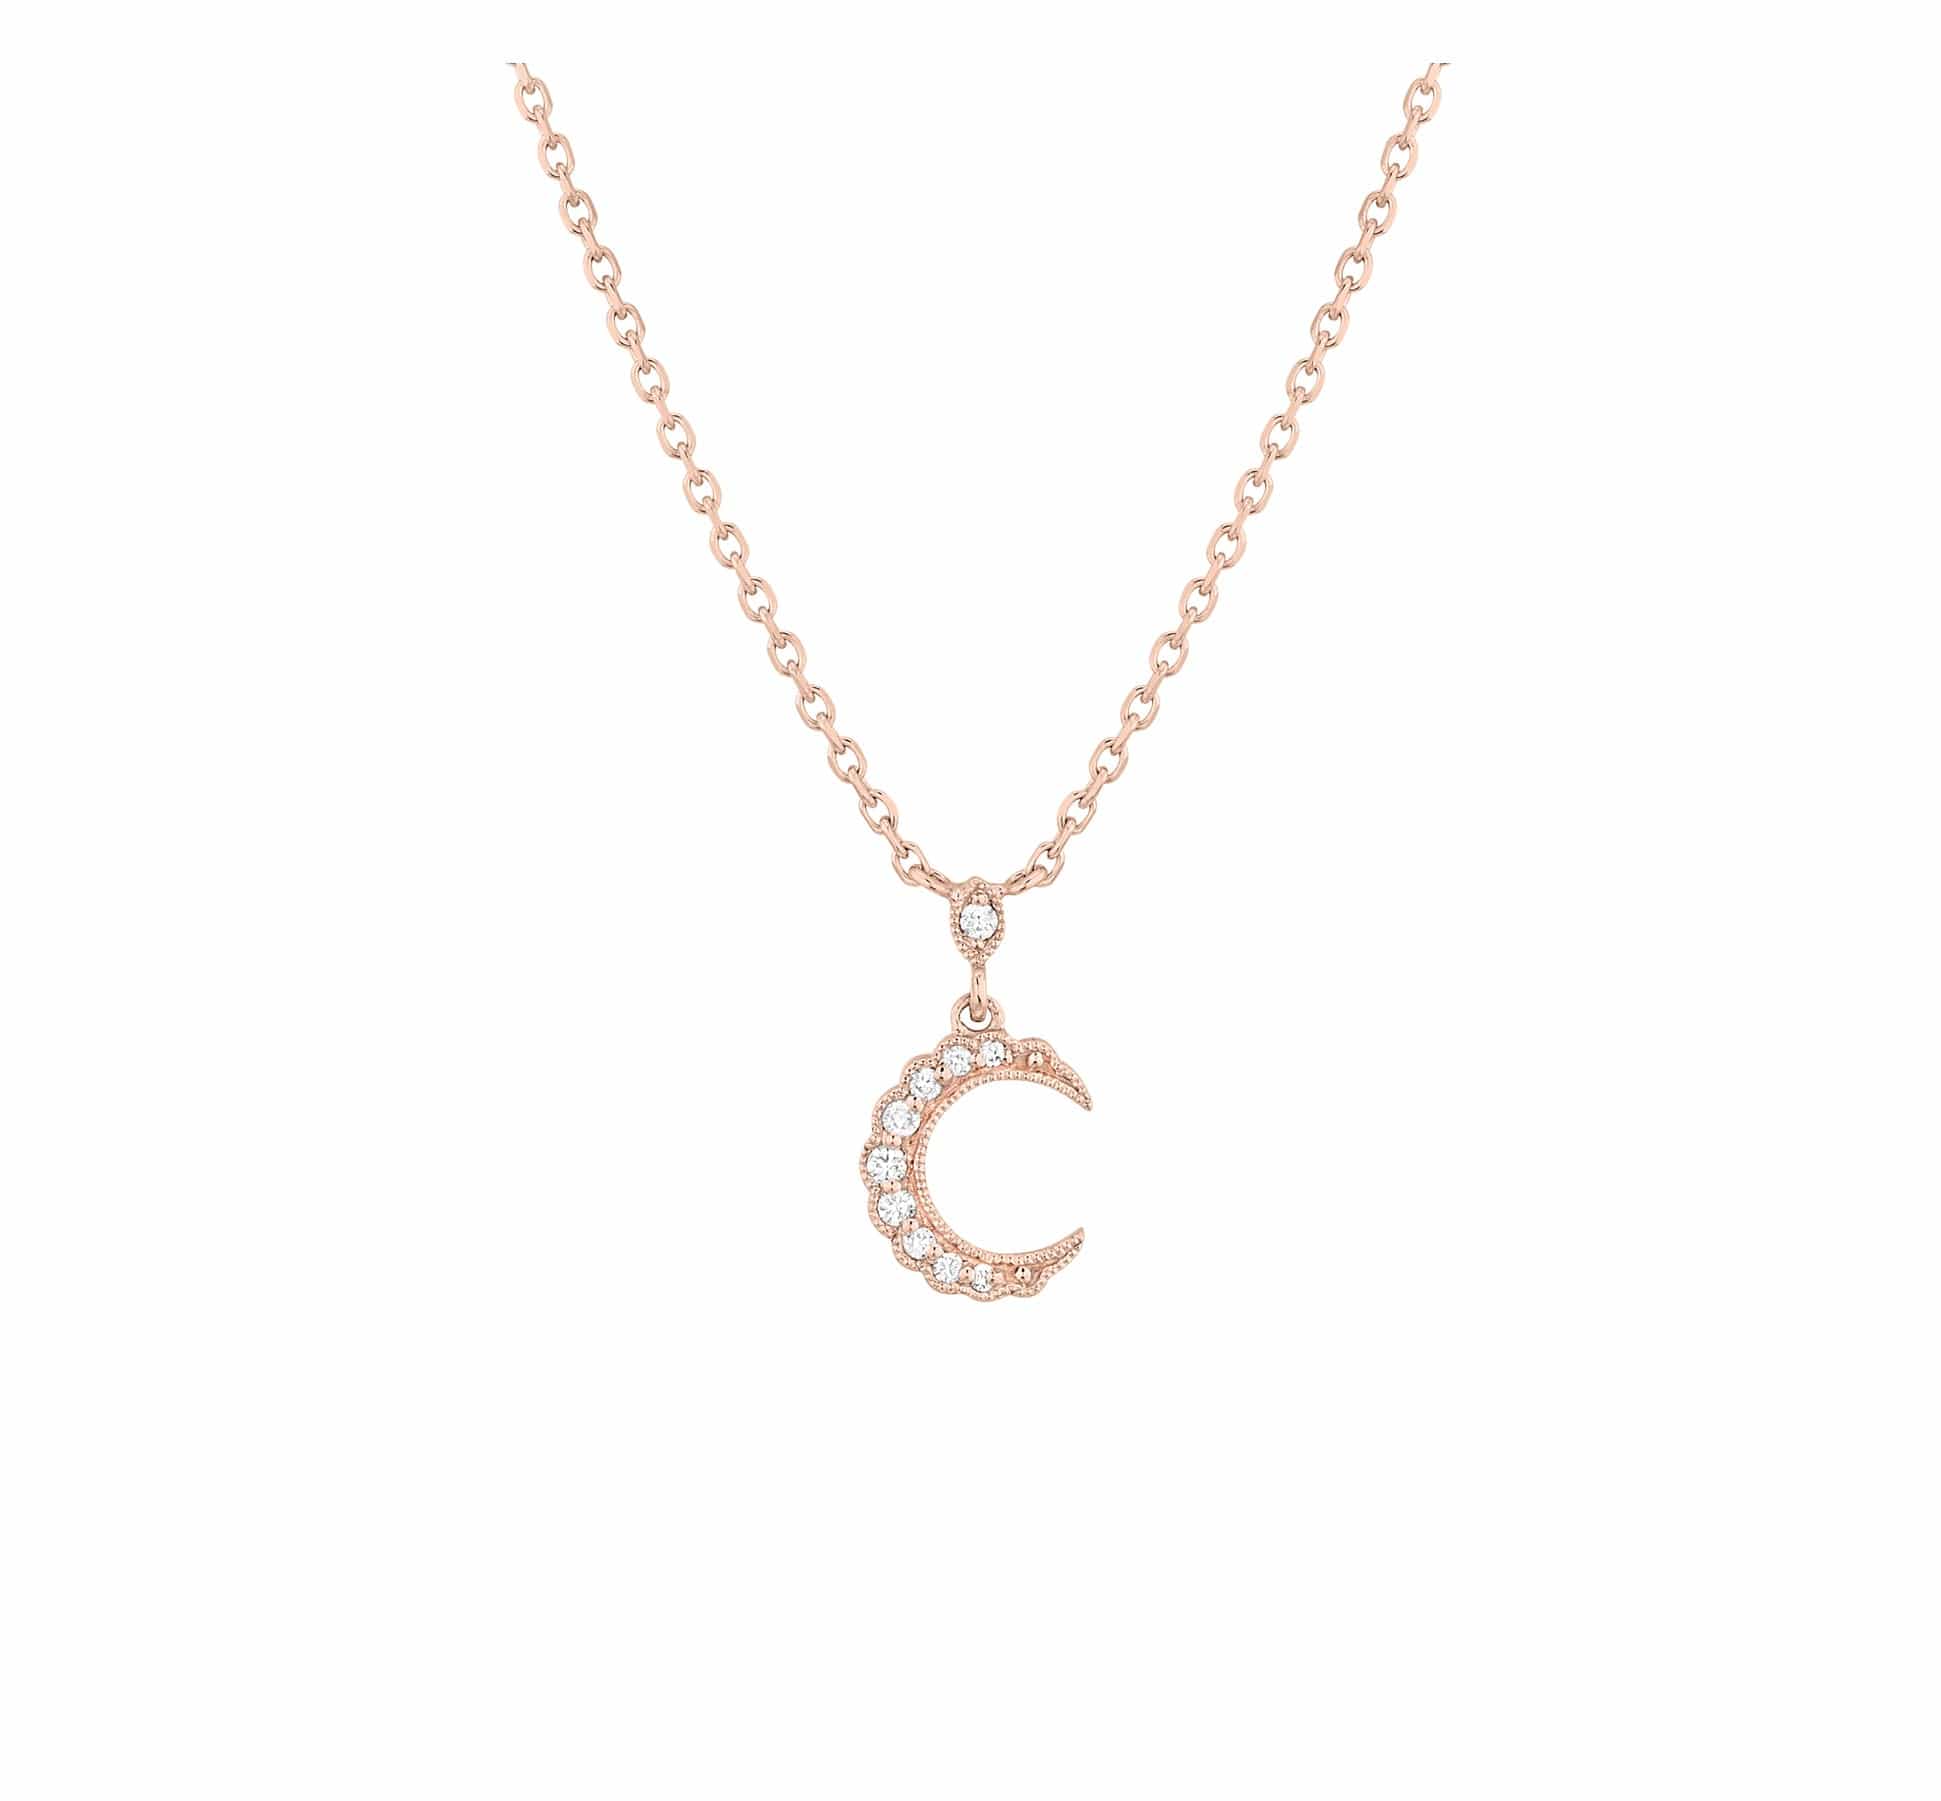 Moonlight Gold and diamonds necklace